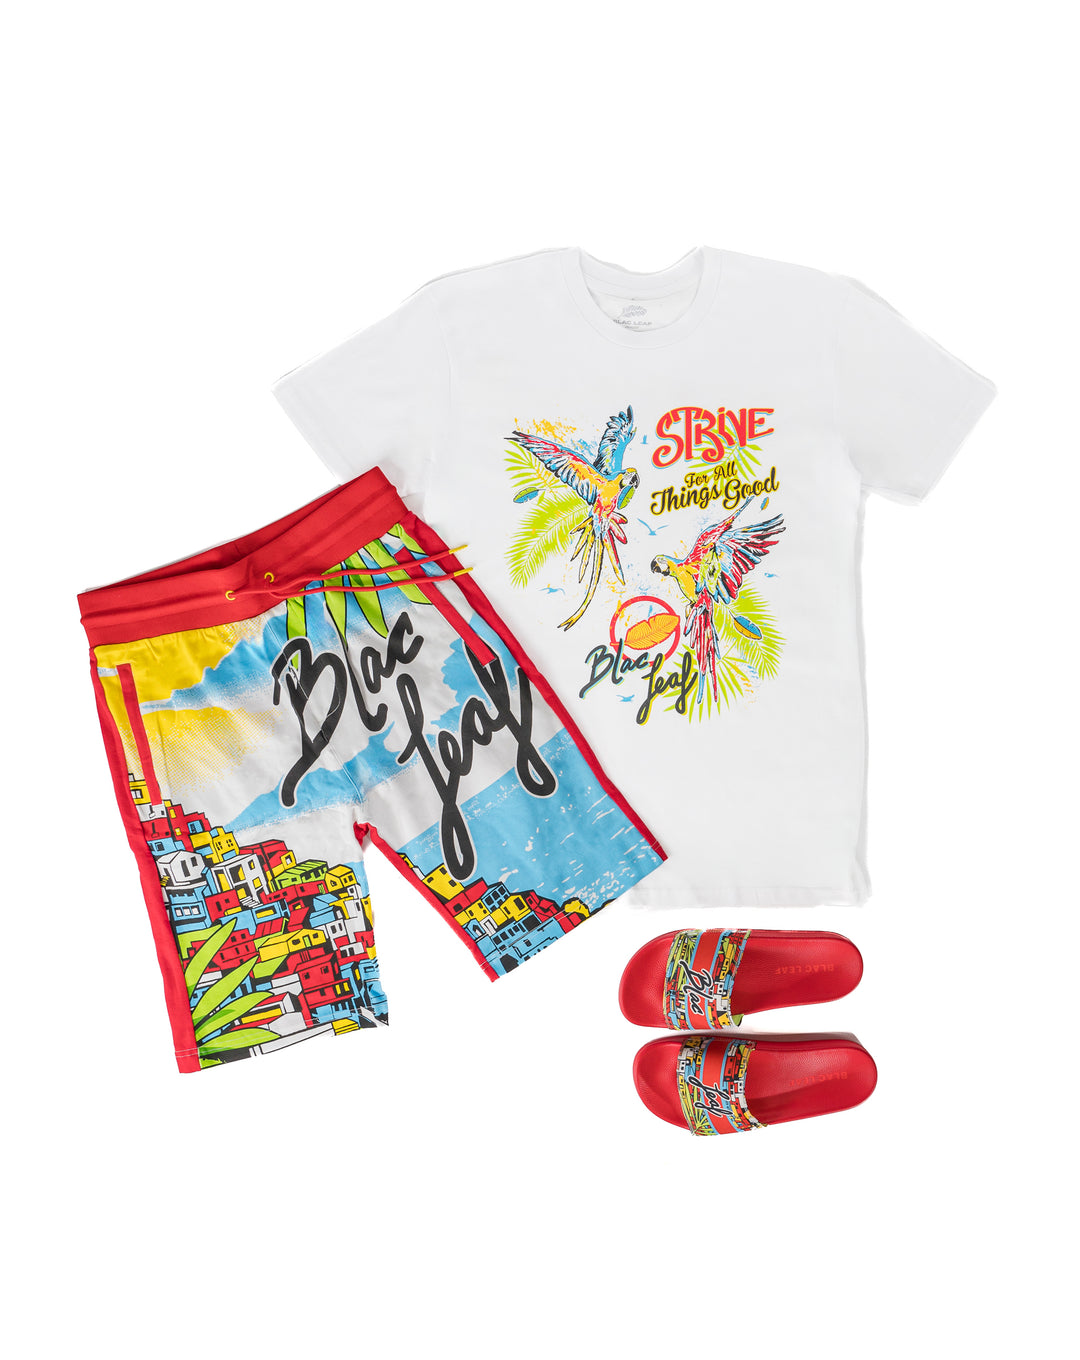 Strive For All Things Good Shirt, Short, and Slide Combo